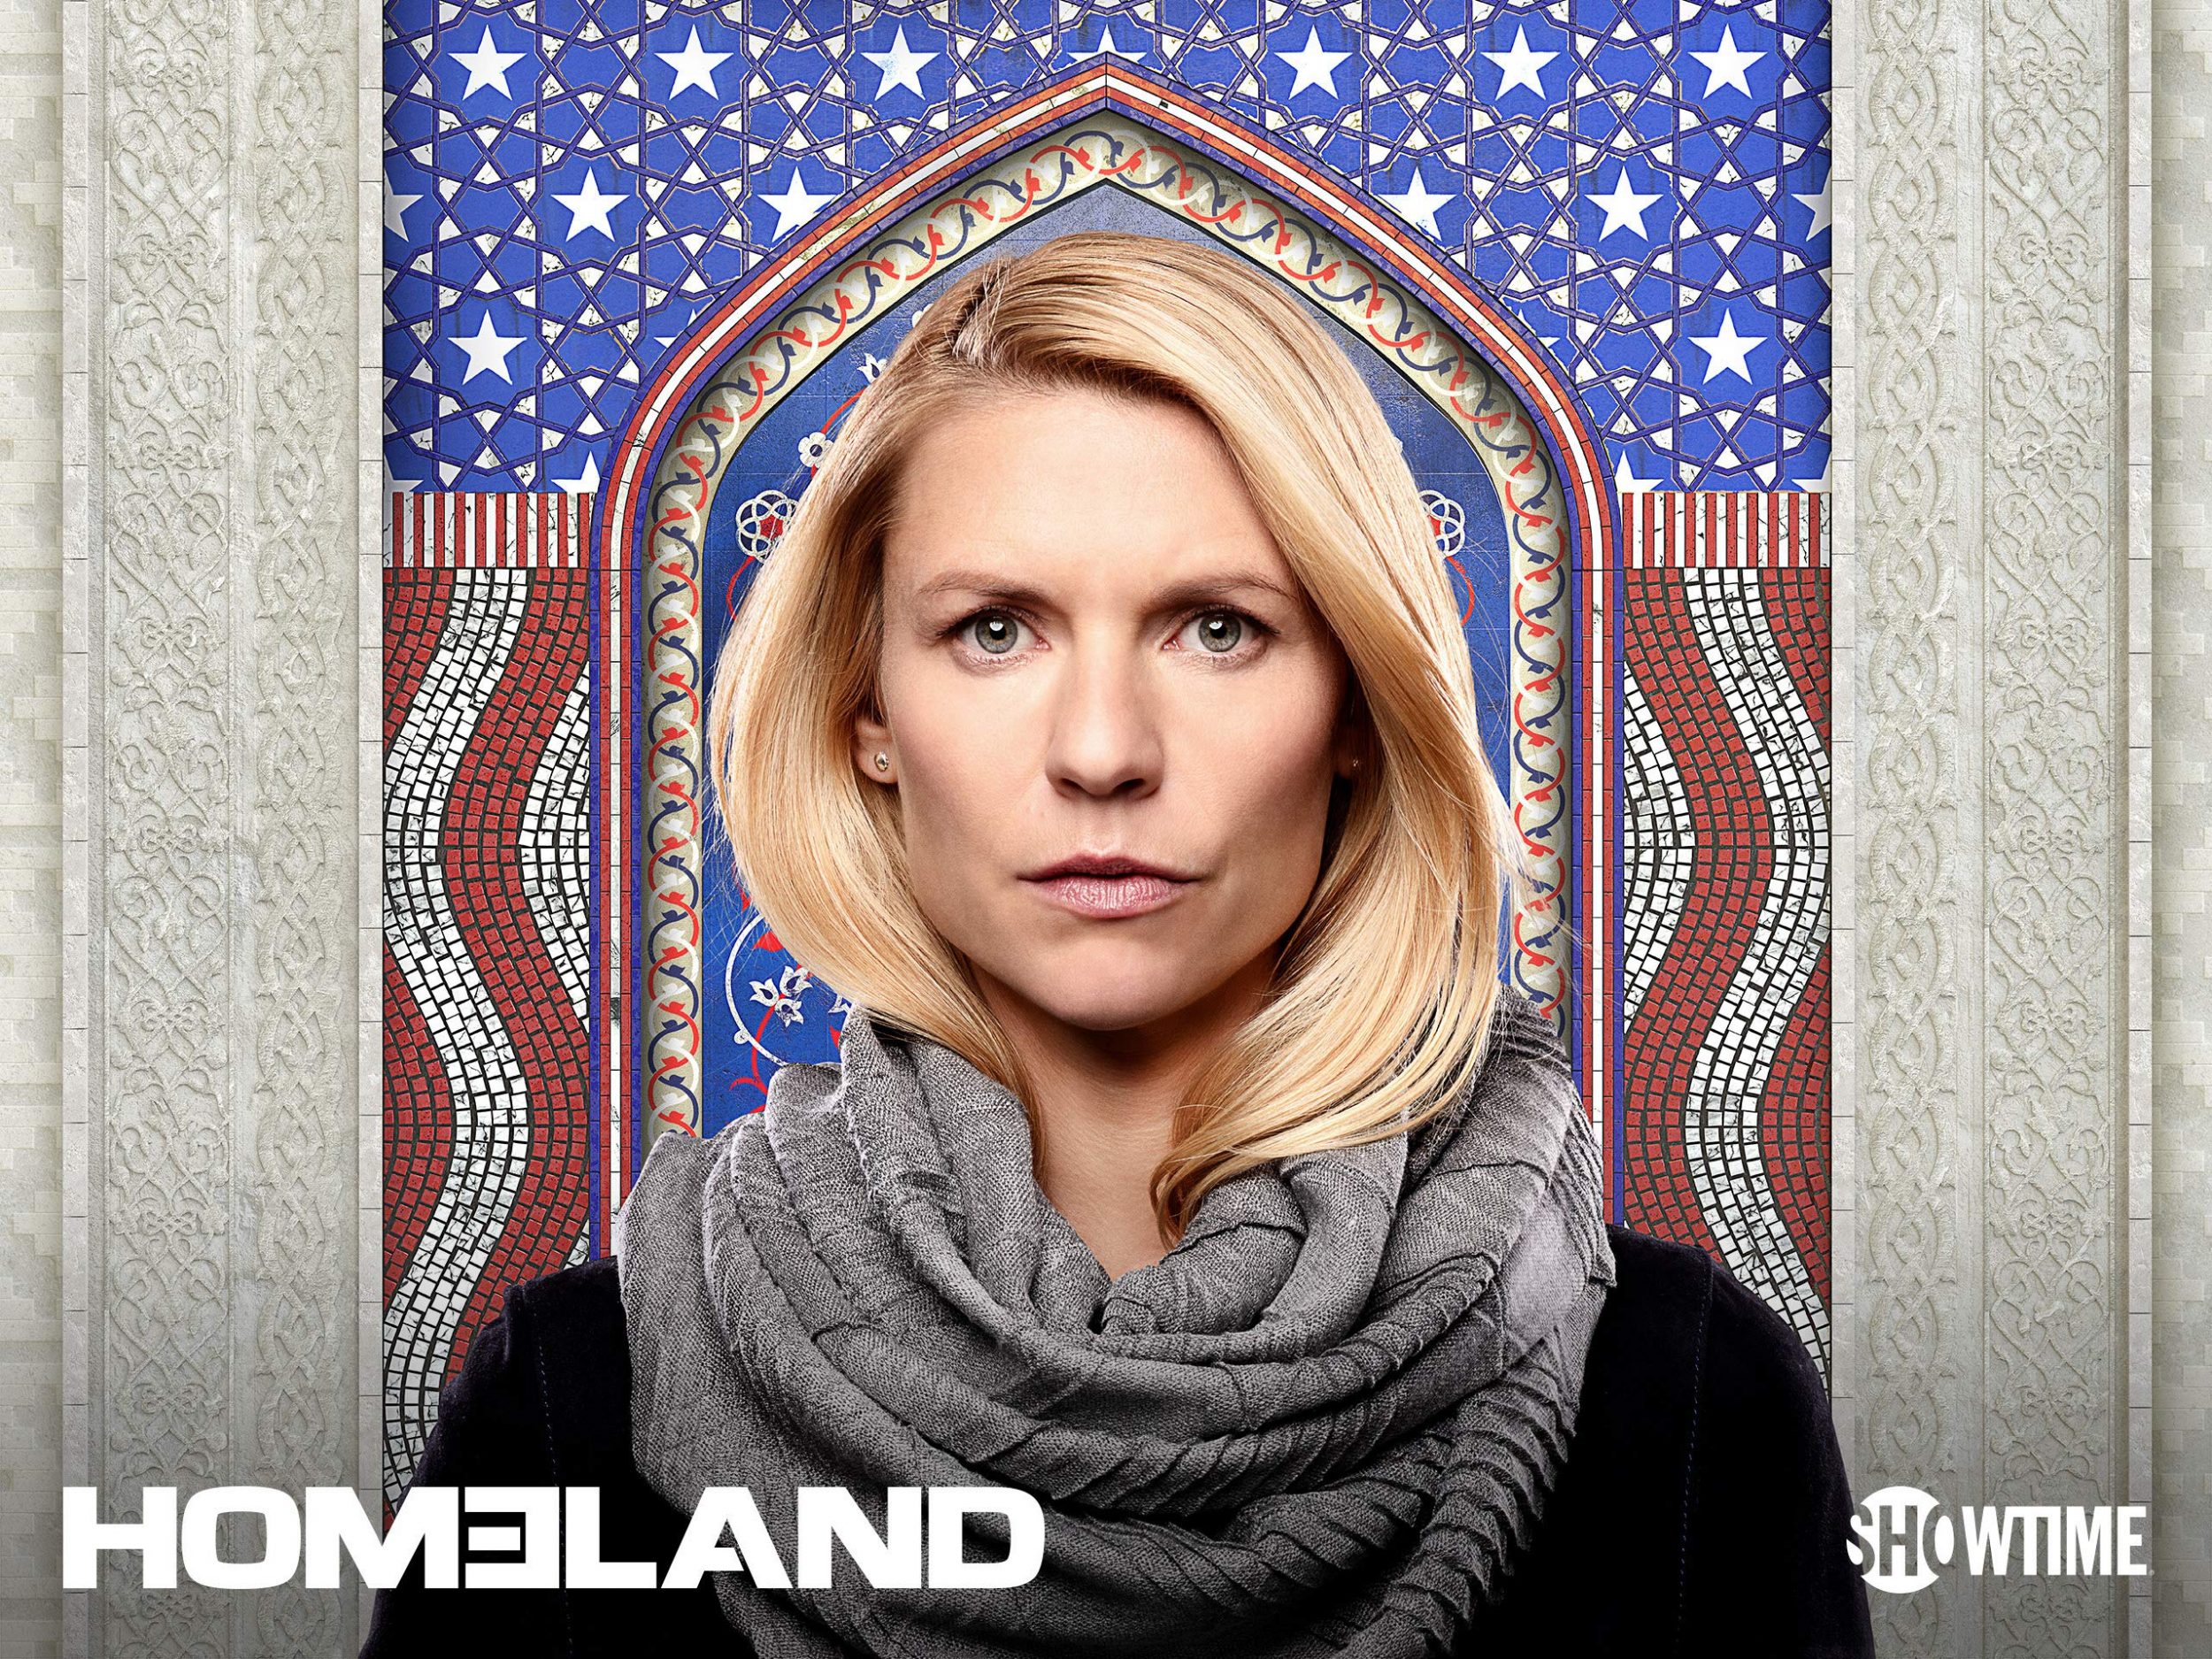 The final season of "Homeland" is strongest ever: it can now be watched on Netflix